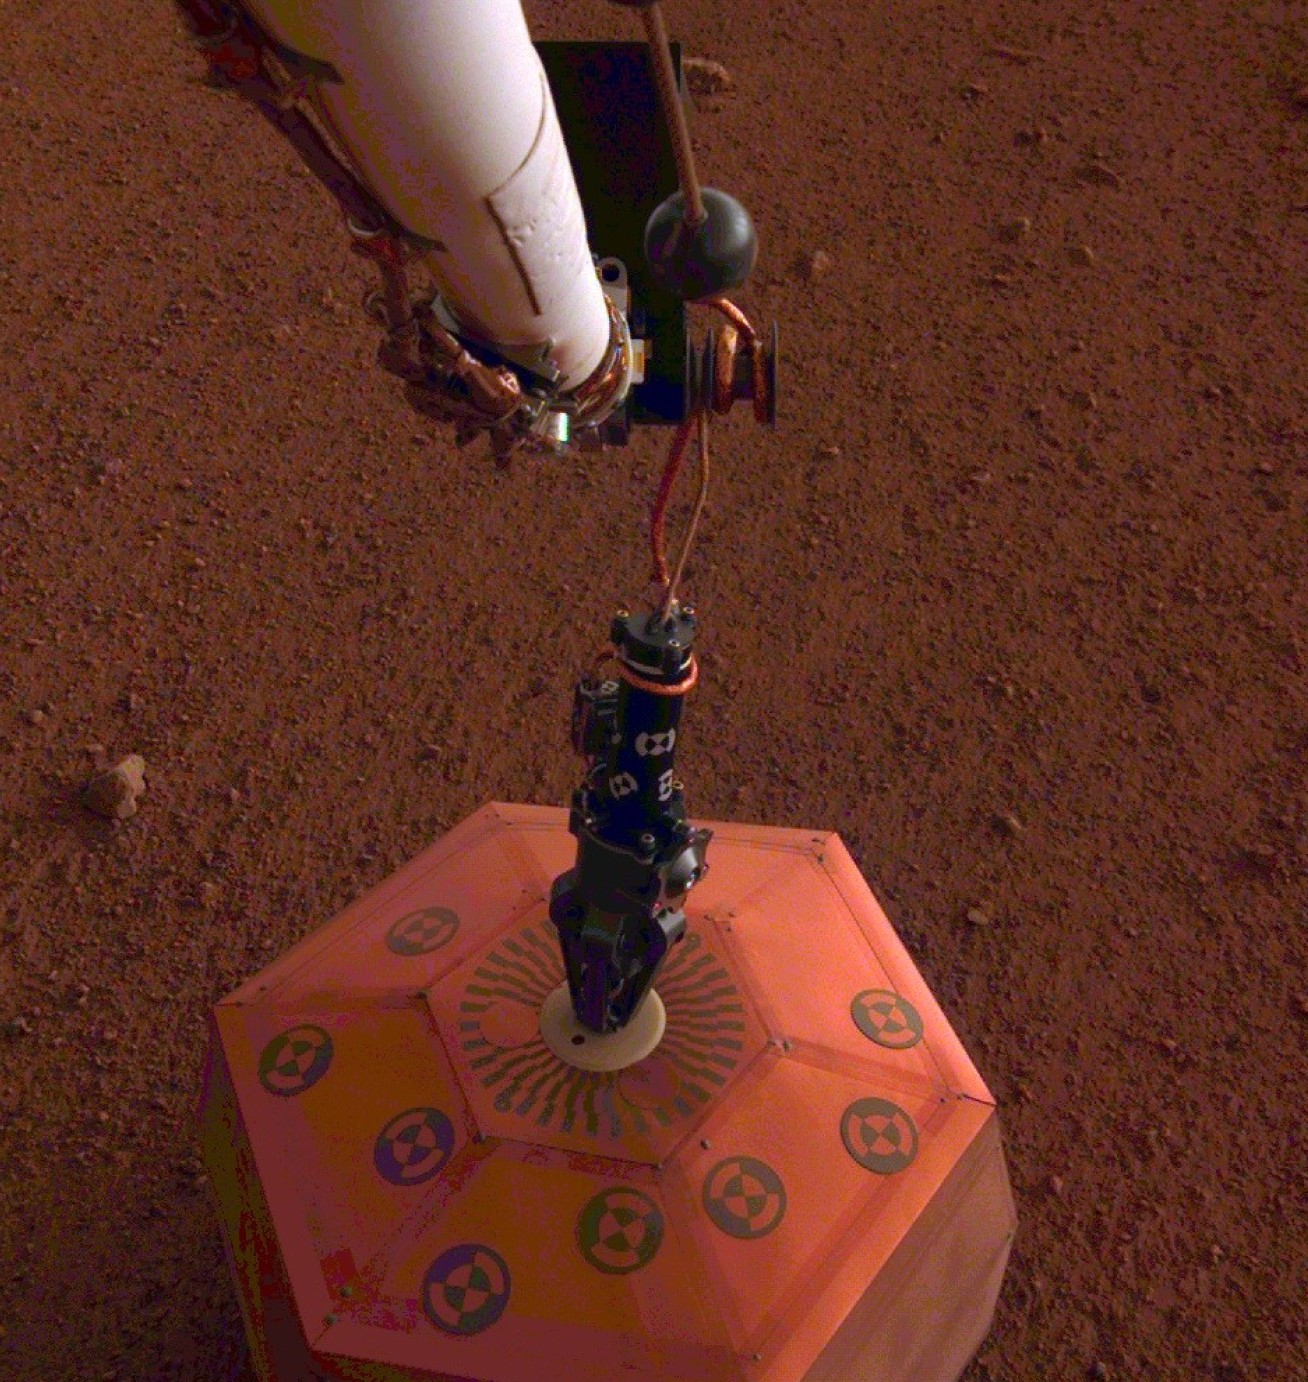 Robotic arm placing an instrument on the surface